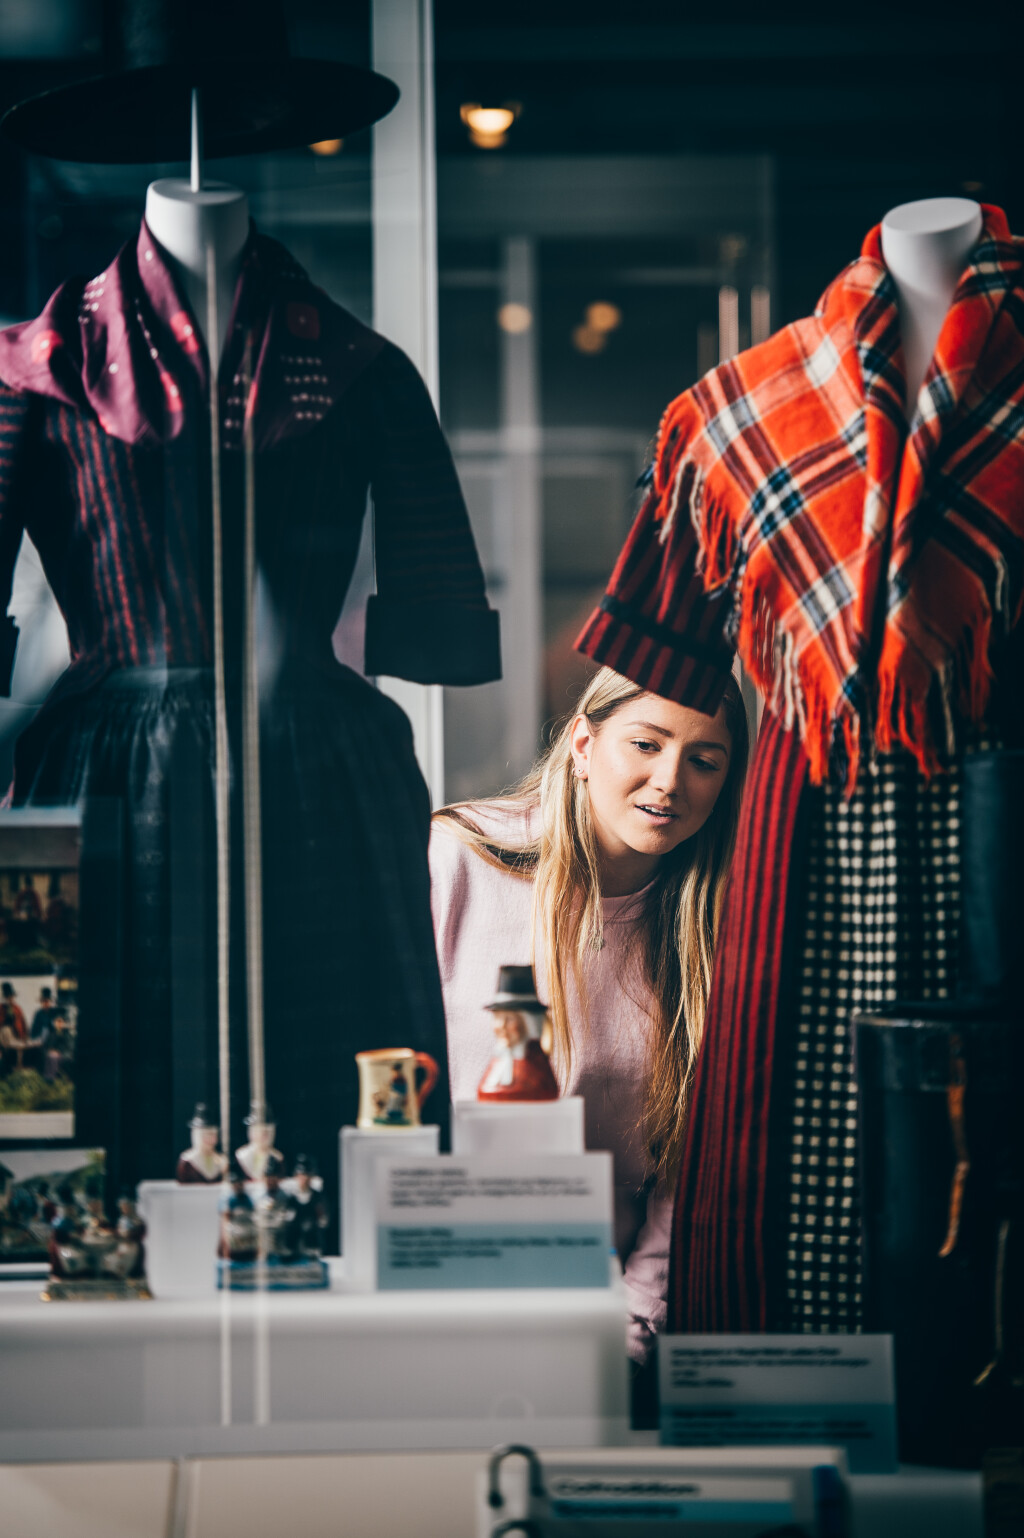 Young woman with blonde hair and a pink jumper looks in awe at items within a collection. Either side there are mannequins with the traditional welsh outfit on them, one with a bright red shawl and the other purple.